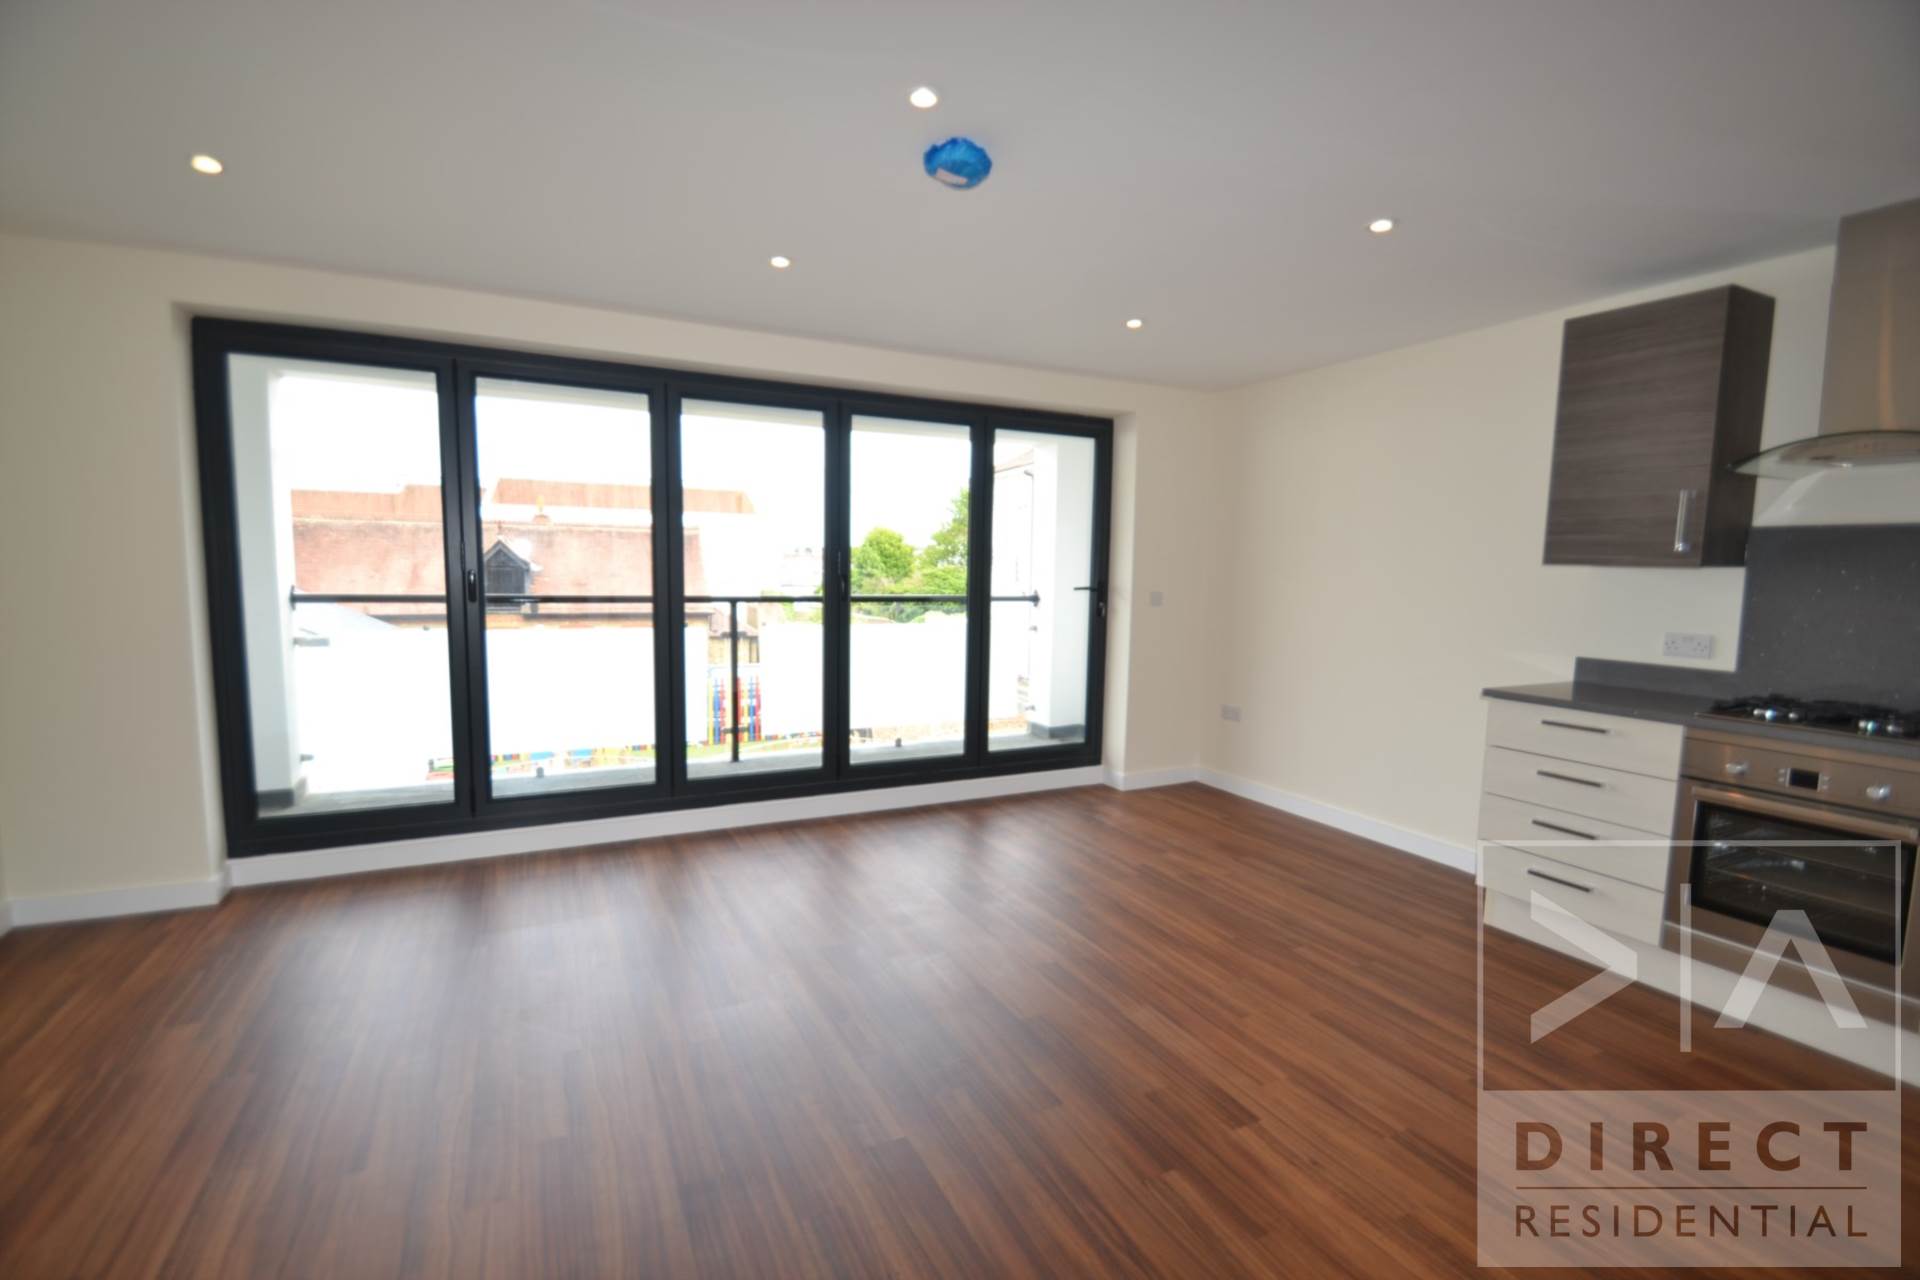 2 bed Apartment for rent in Epsom. From Direct Residential - Epsom